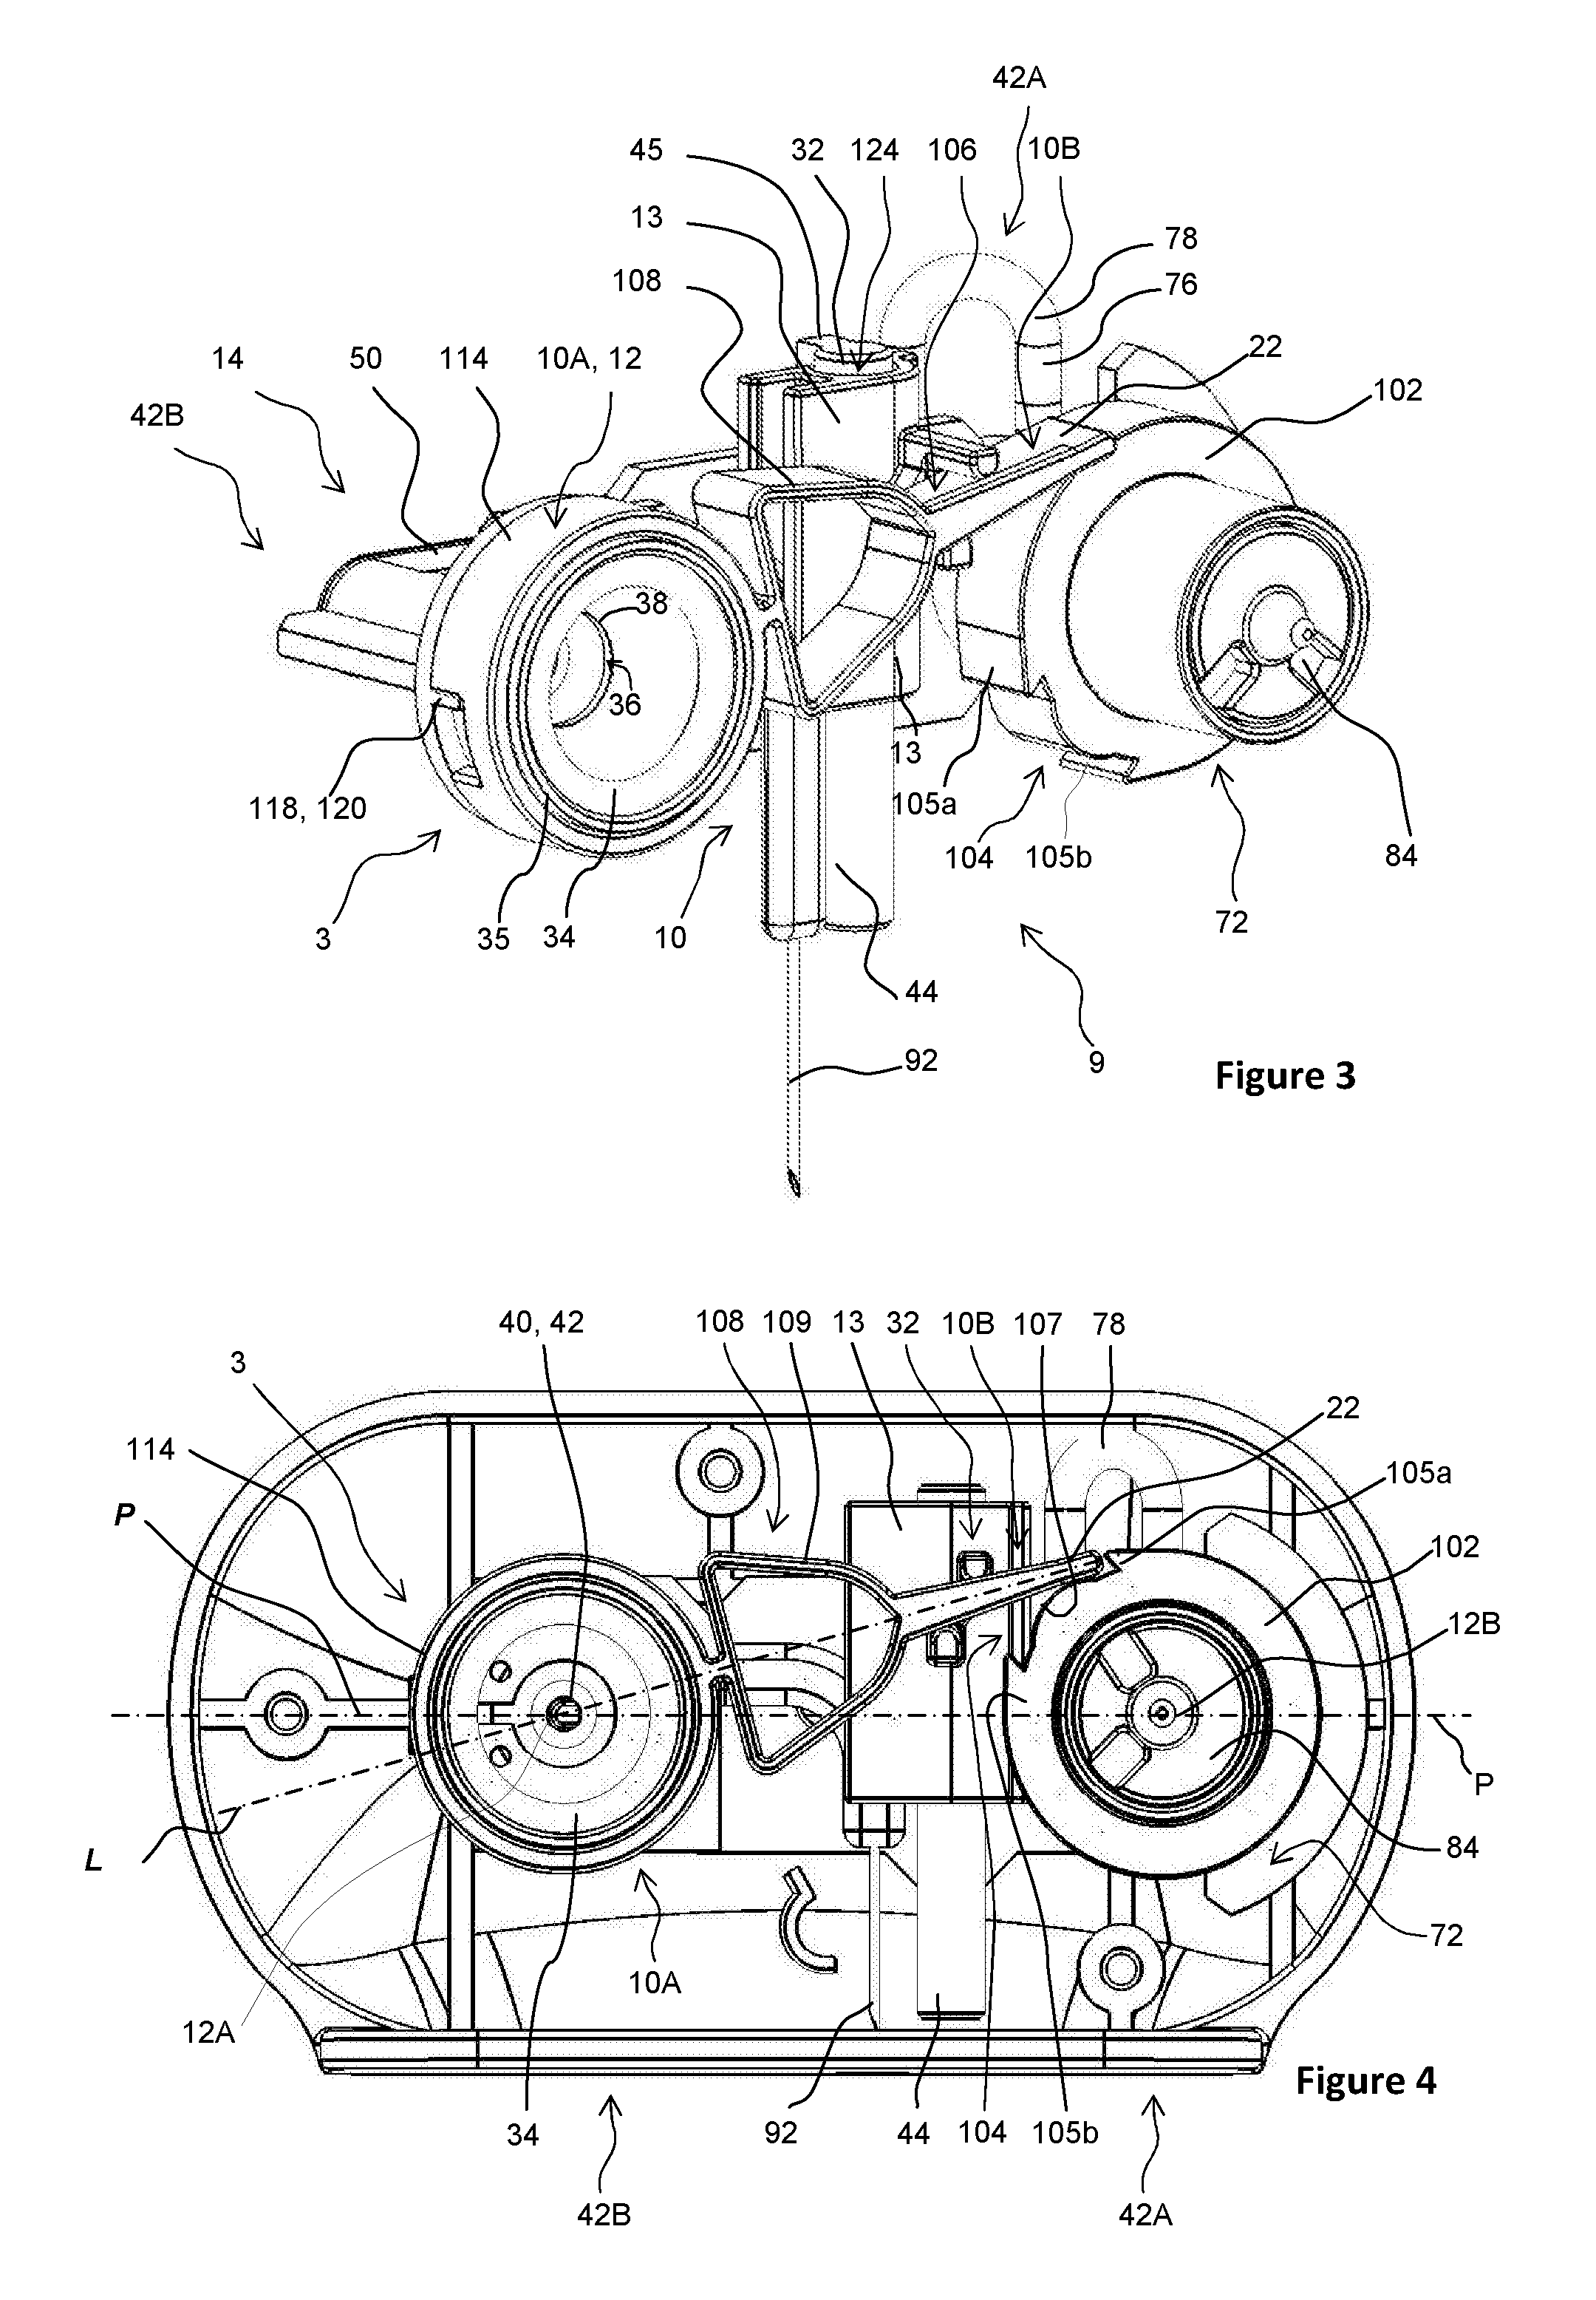 Drug delivery device with needle actuation mechanism